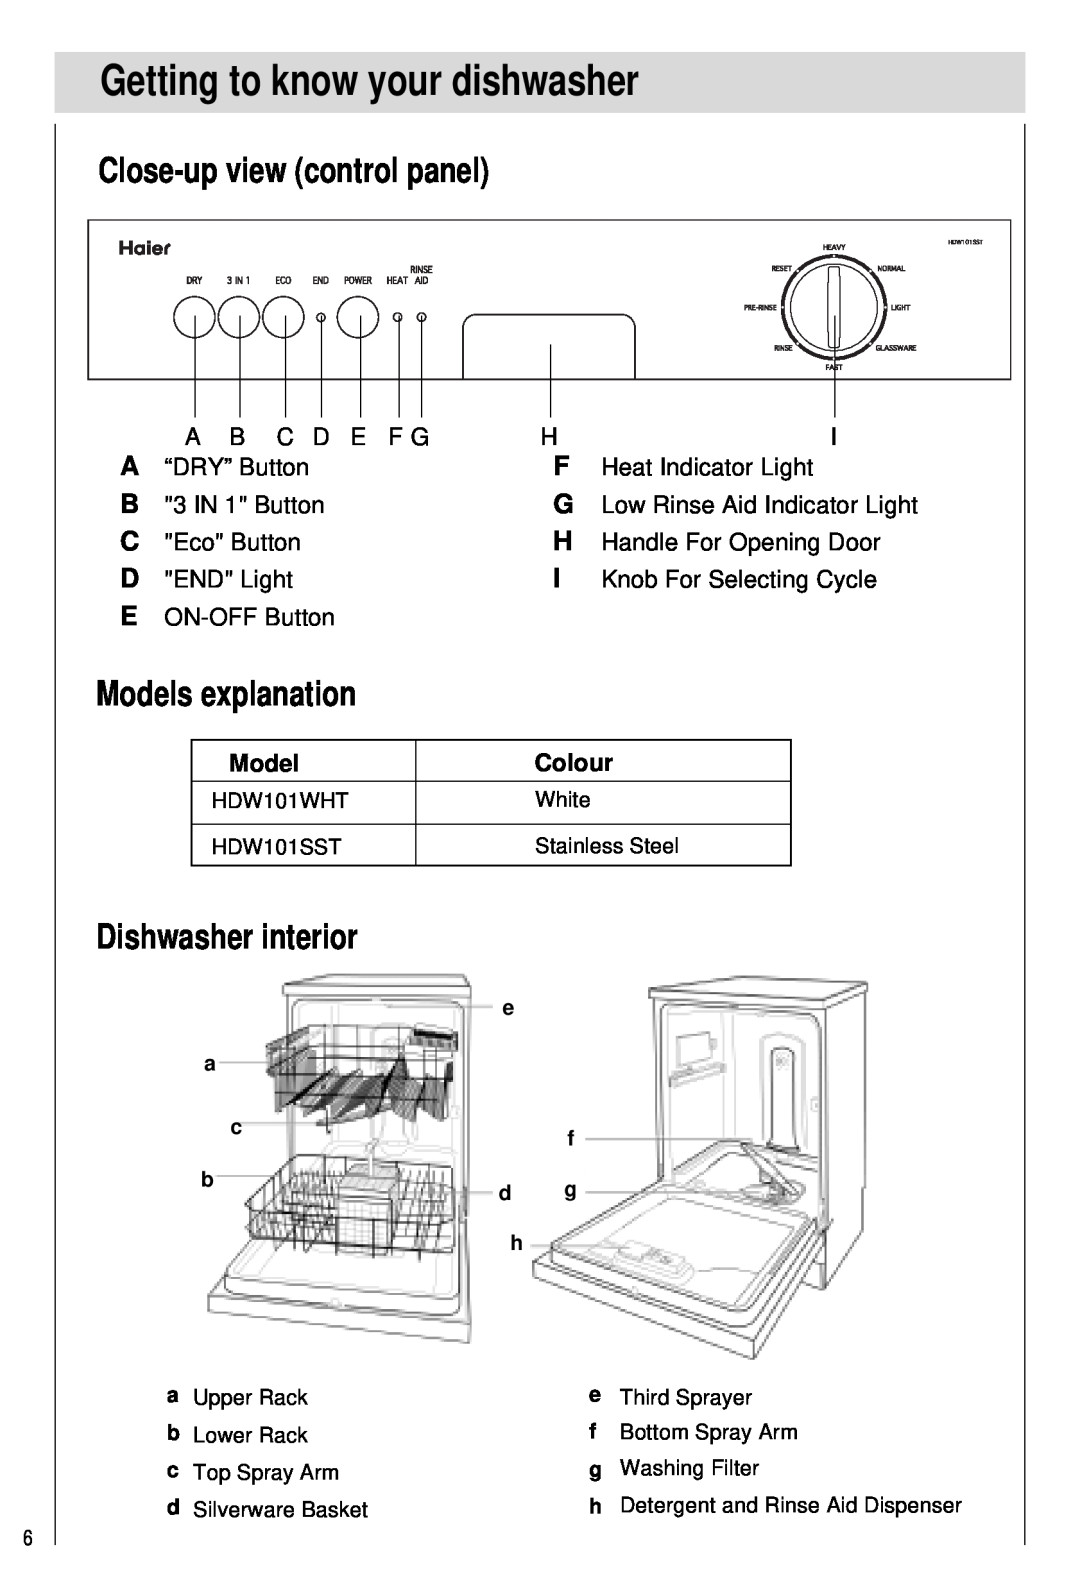 Haier HDW101SST manual Getting to know your dishwasher, Close-upview control panel, Models explanation, Dishwasher interior 